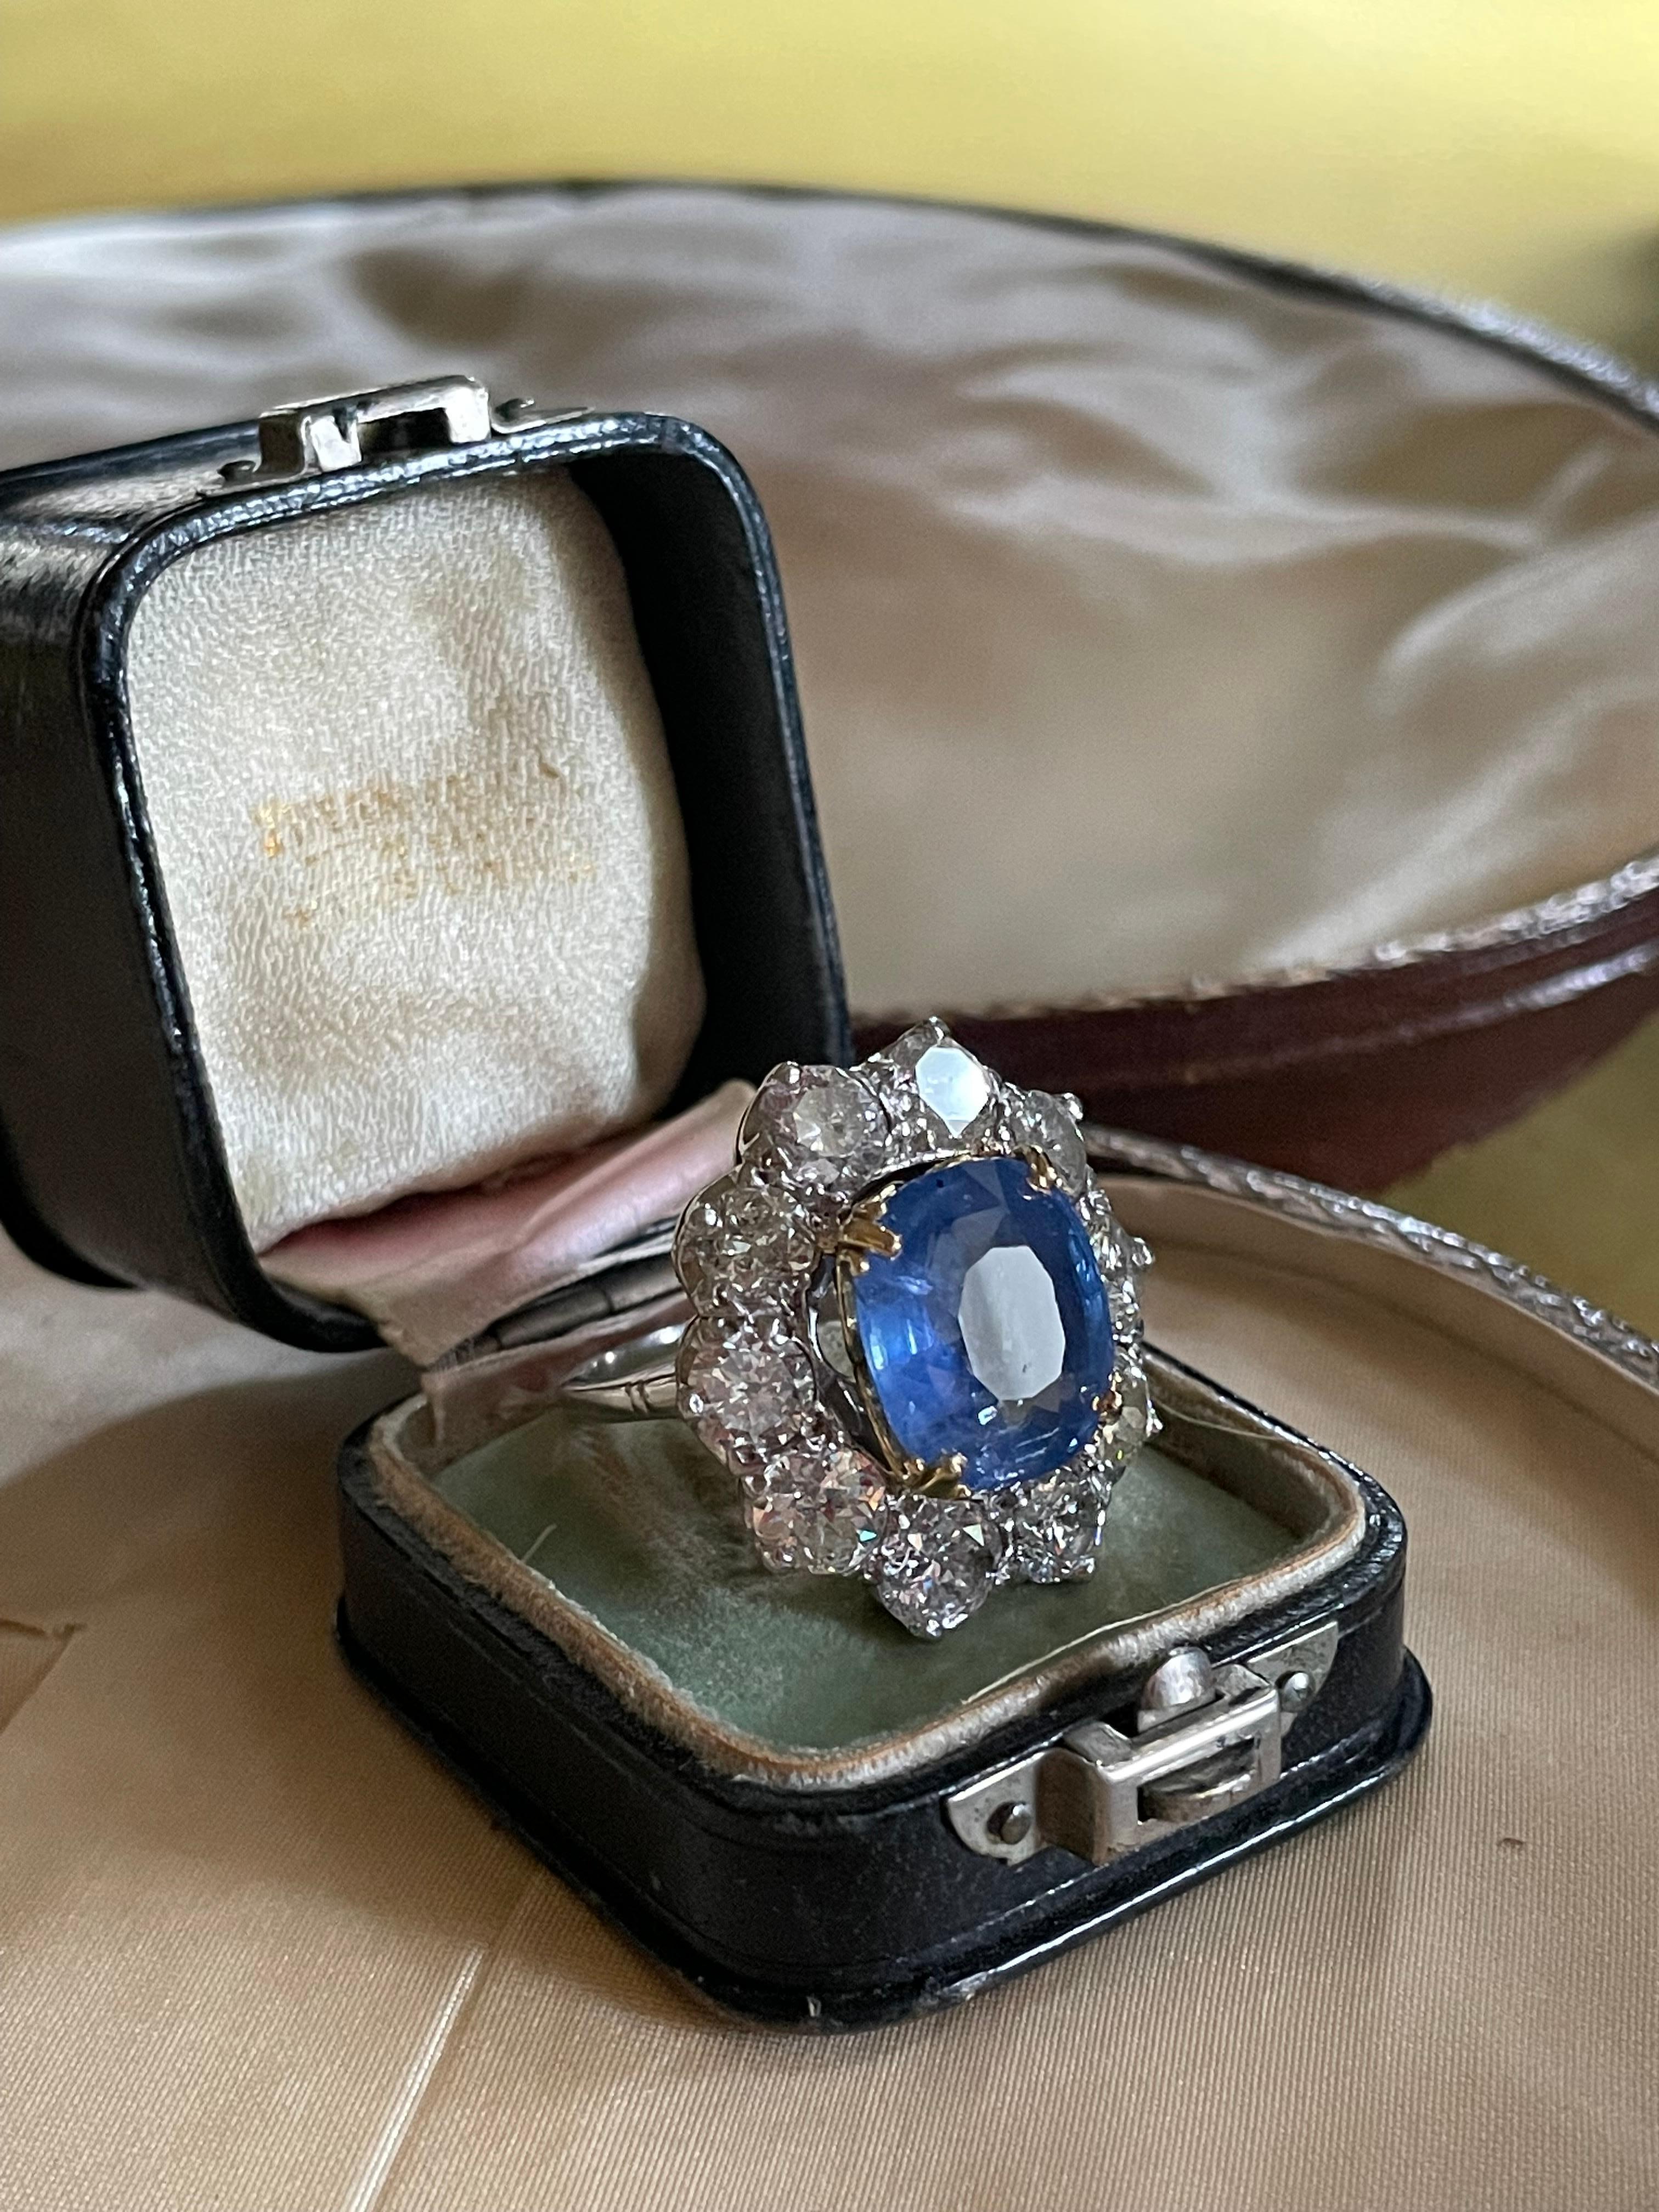 Old South Jewels proudly presents... BEST OF THE BEST... TIFFANY & CO HUGE ANTIQUE 18.26 CARAT SAPPHIRE RING!   GIA CERTIFIED PLATINUM & 18k HUGE UNHEATED SAPPHIRE DIAMOND VINTAGE RING & BOX!   GIANT 10.02 CARAT BRILLIANT ROYAL BLUE GIA CERTIFIED